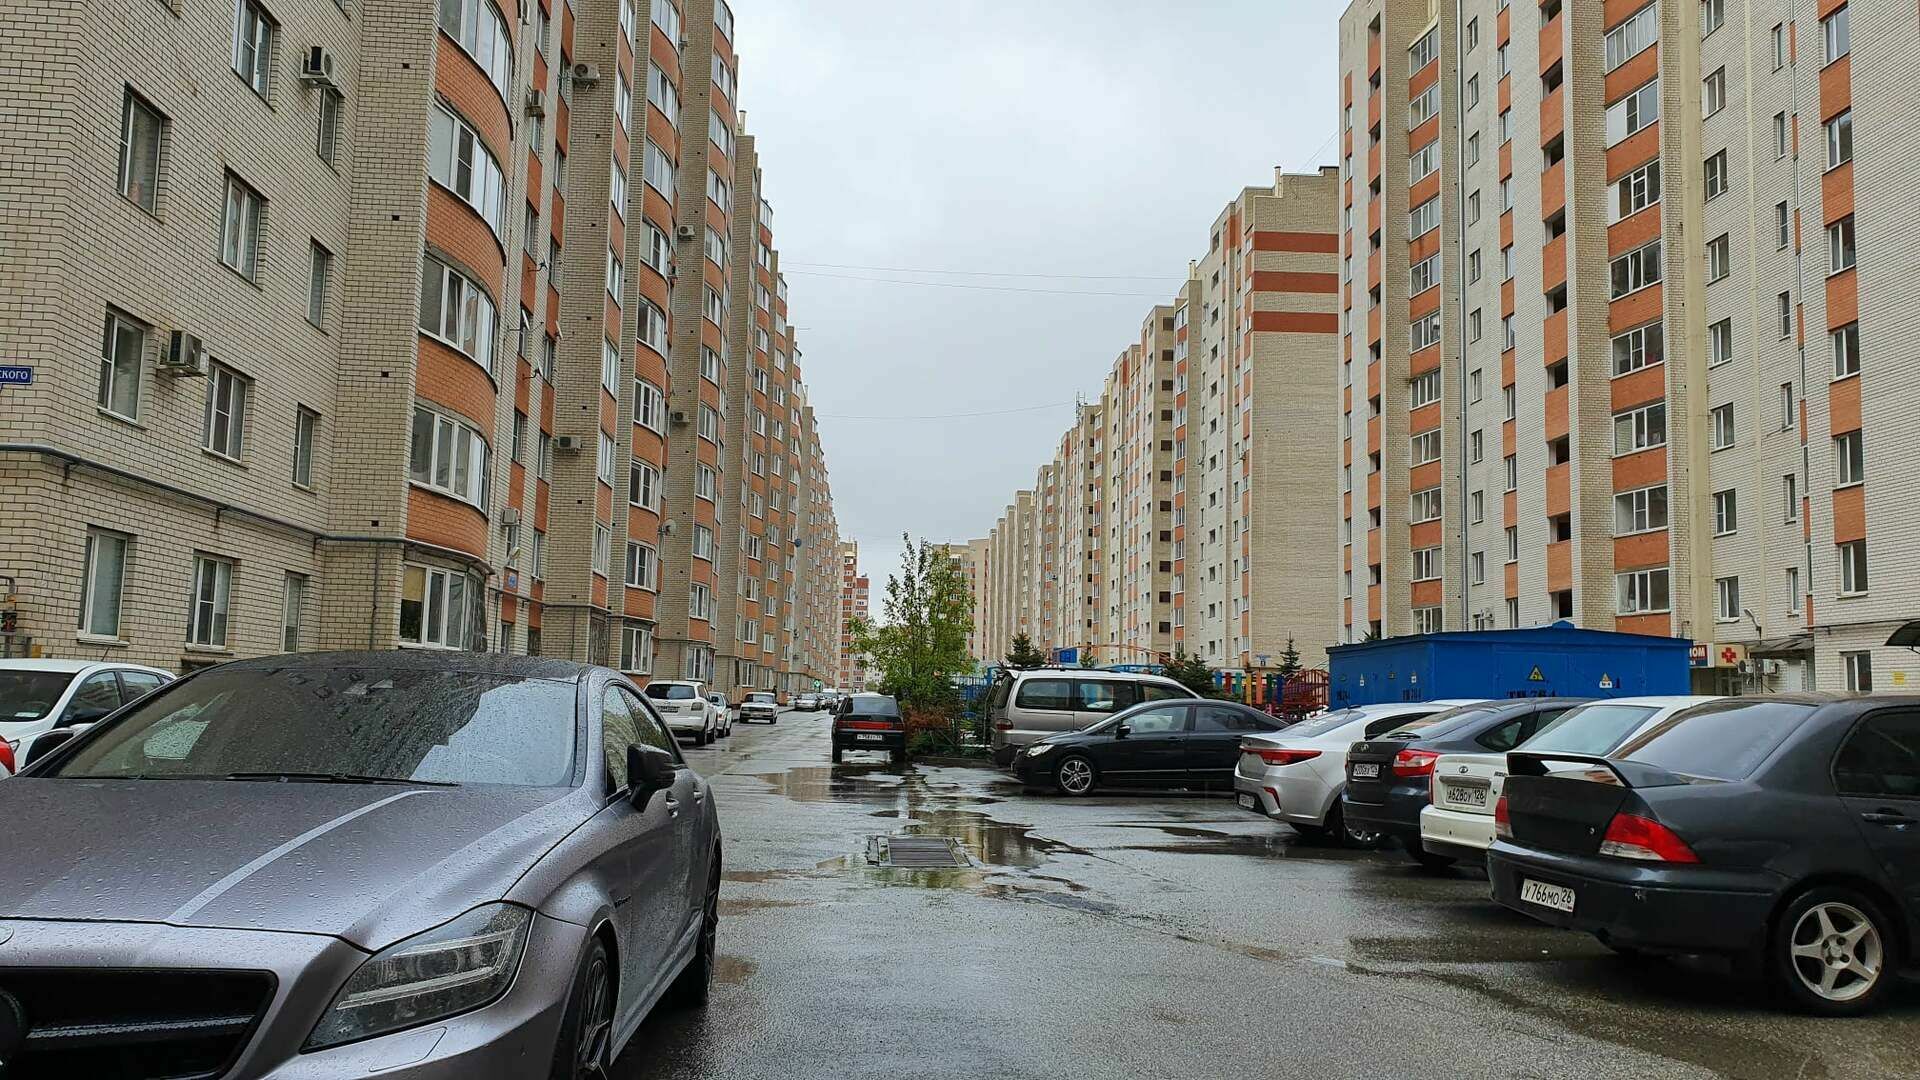 Not only Moscow: why the largest country in the world is being built up with "human ant-hills"